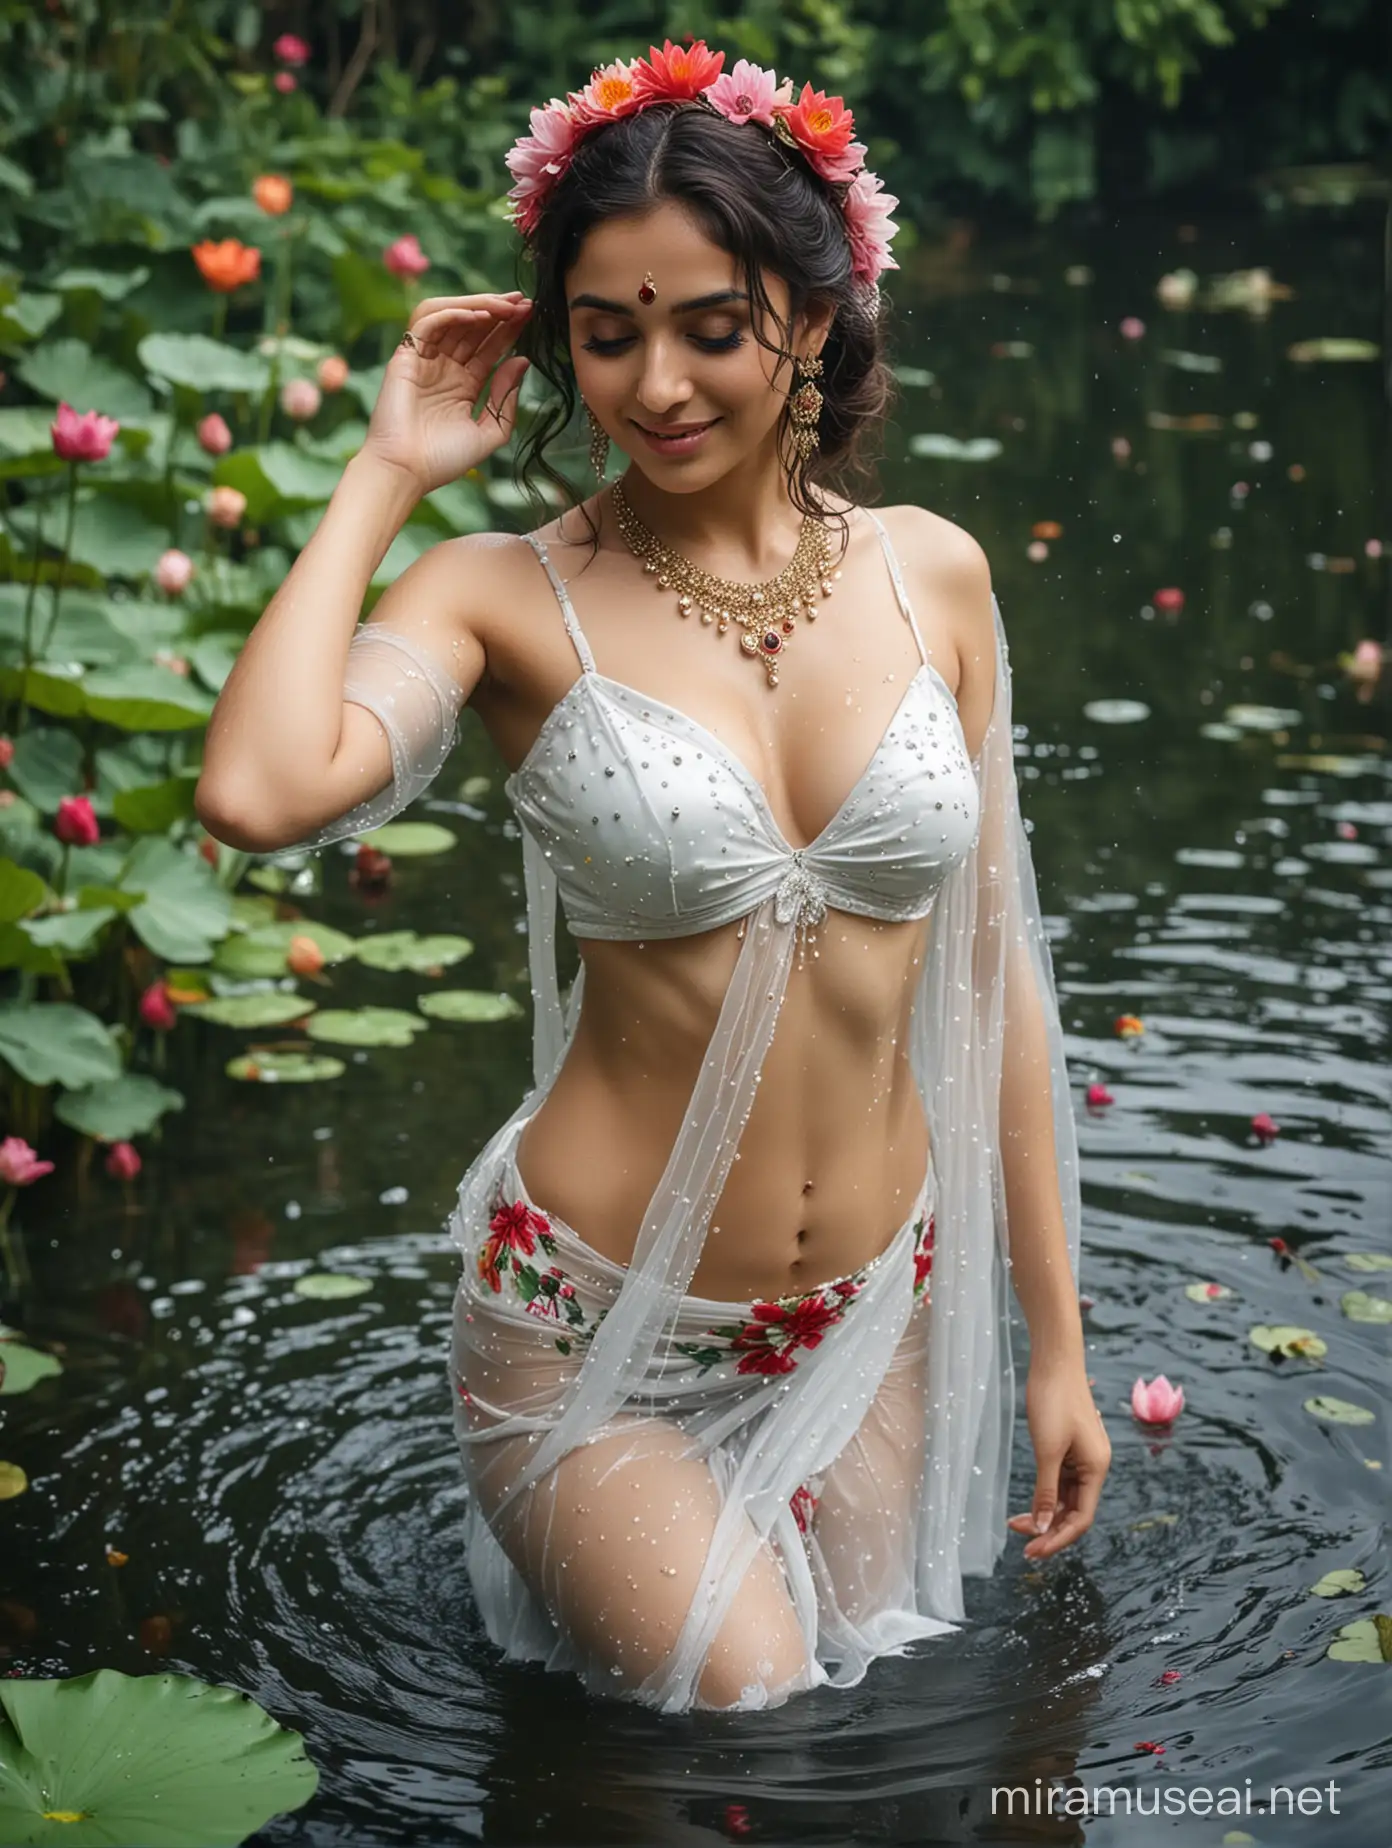 Innocent and Shy Indian Bride Bathing in Pond with Elegant Wet Saree Look